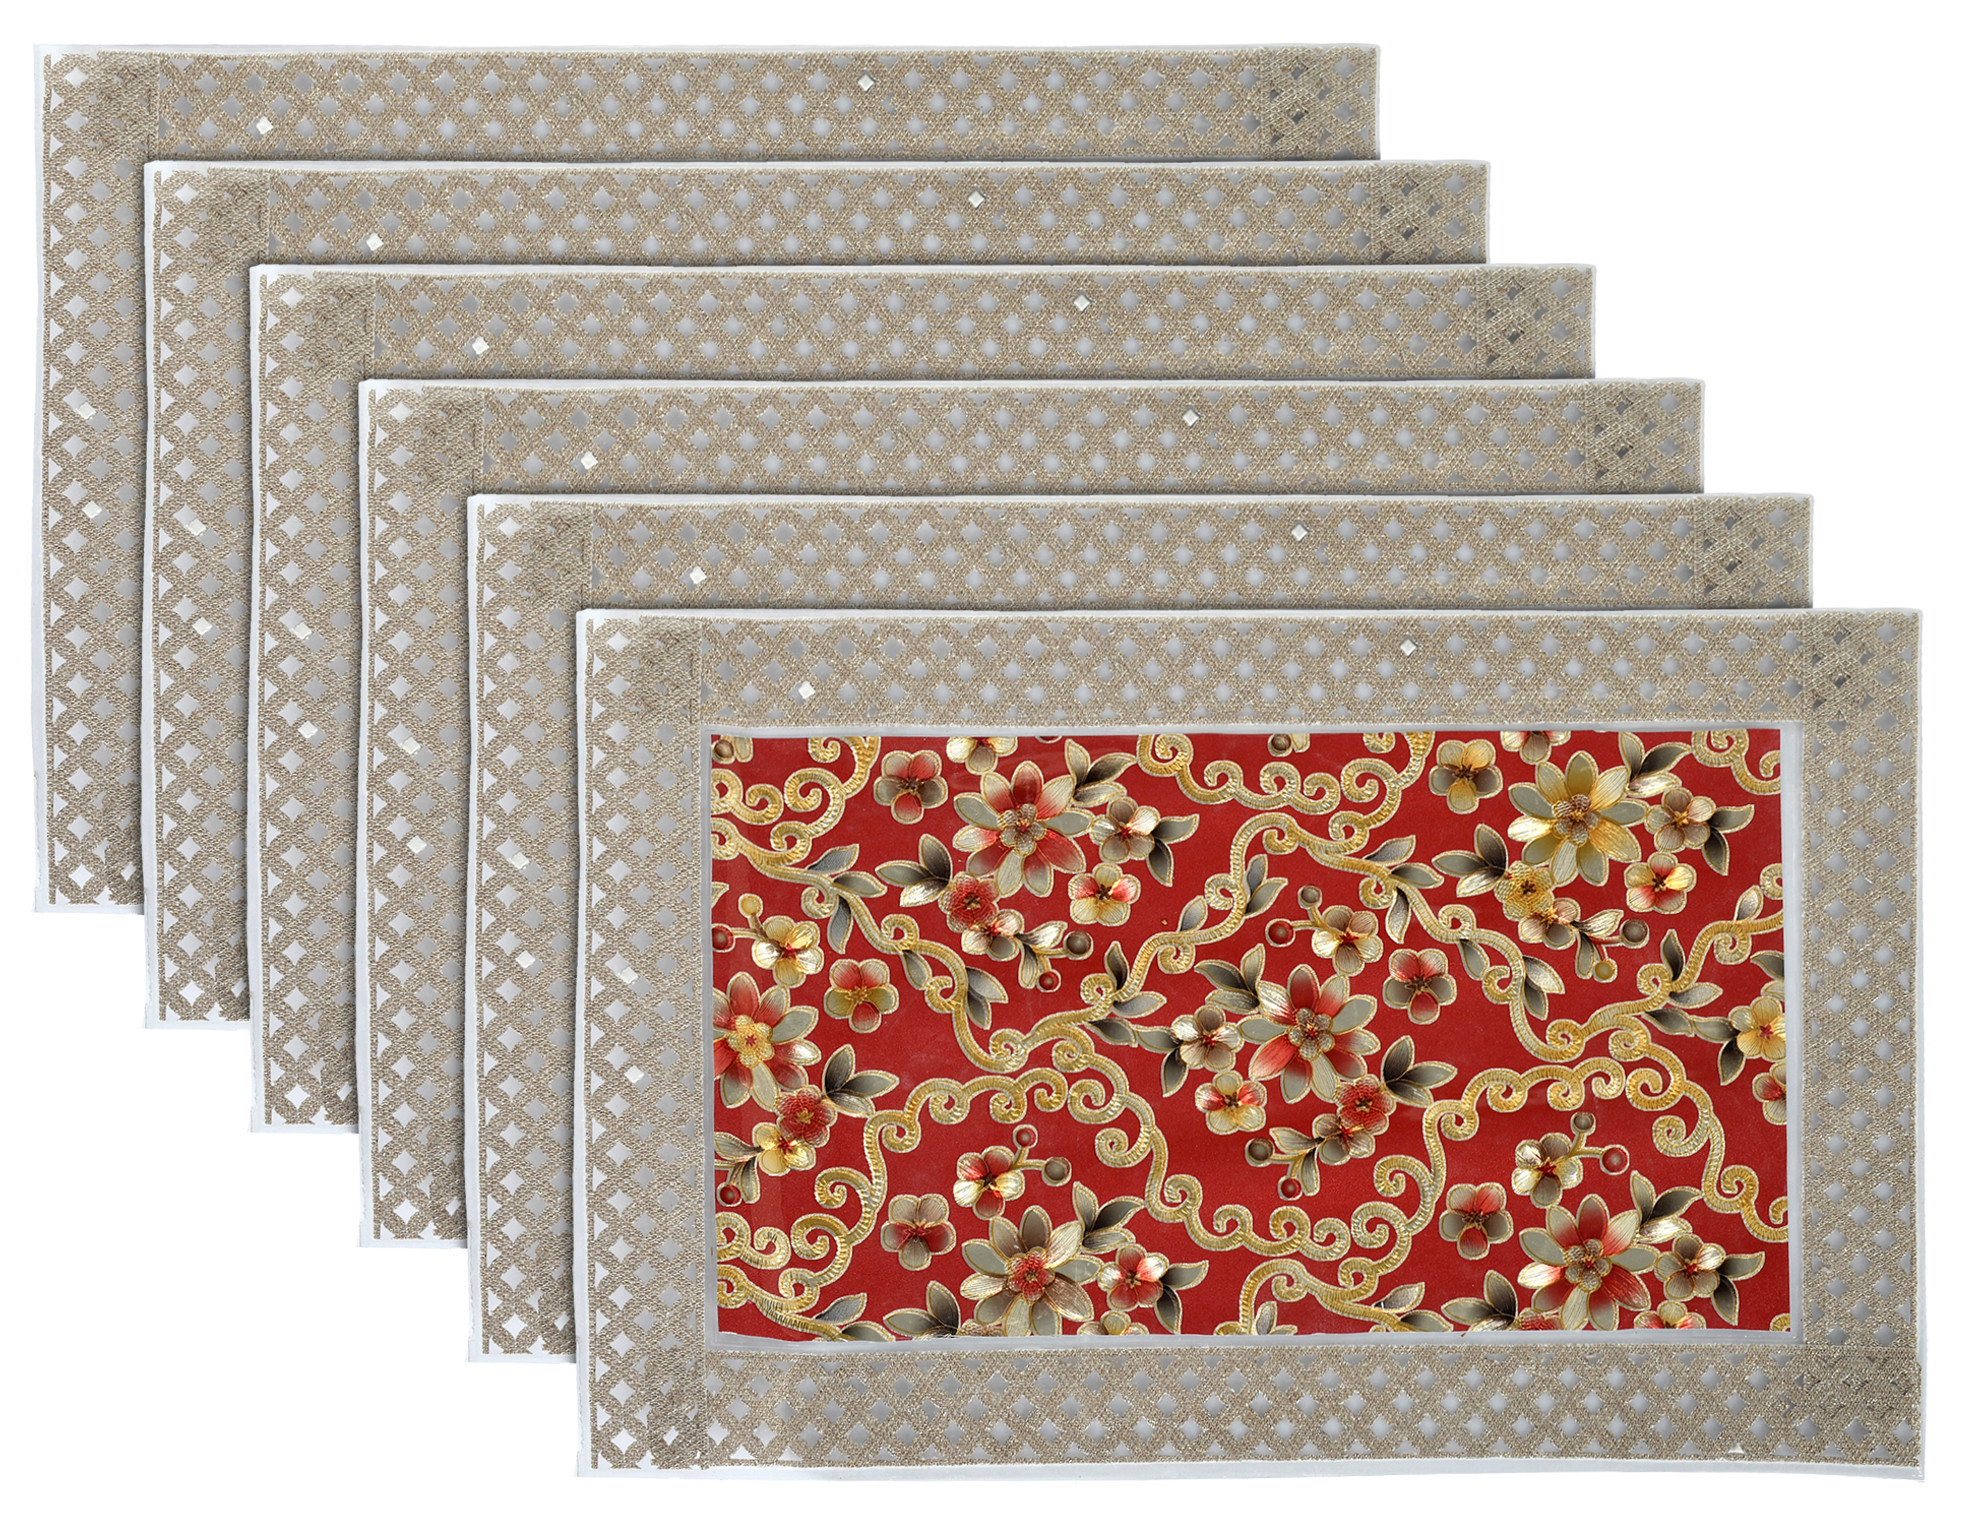 Kuber Industries Flower Design PVC Dining Table Placemat Set, Set of 6 (Maroon)